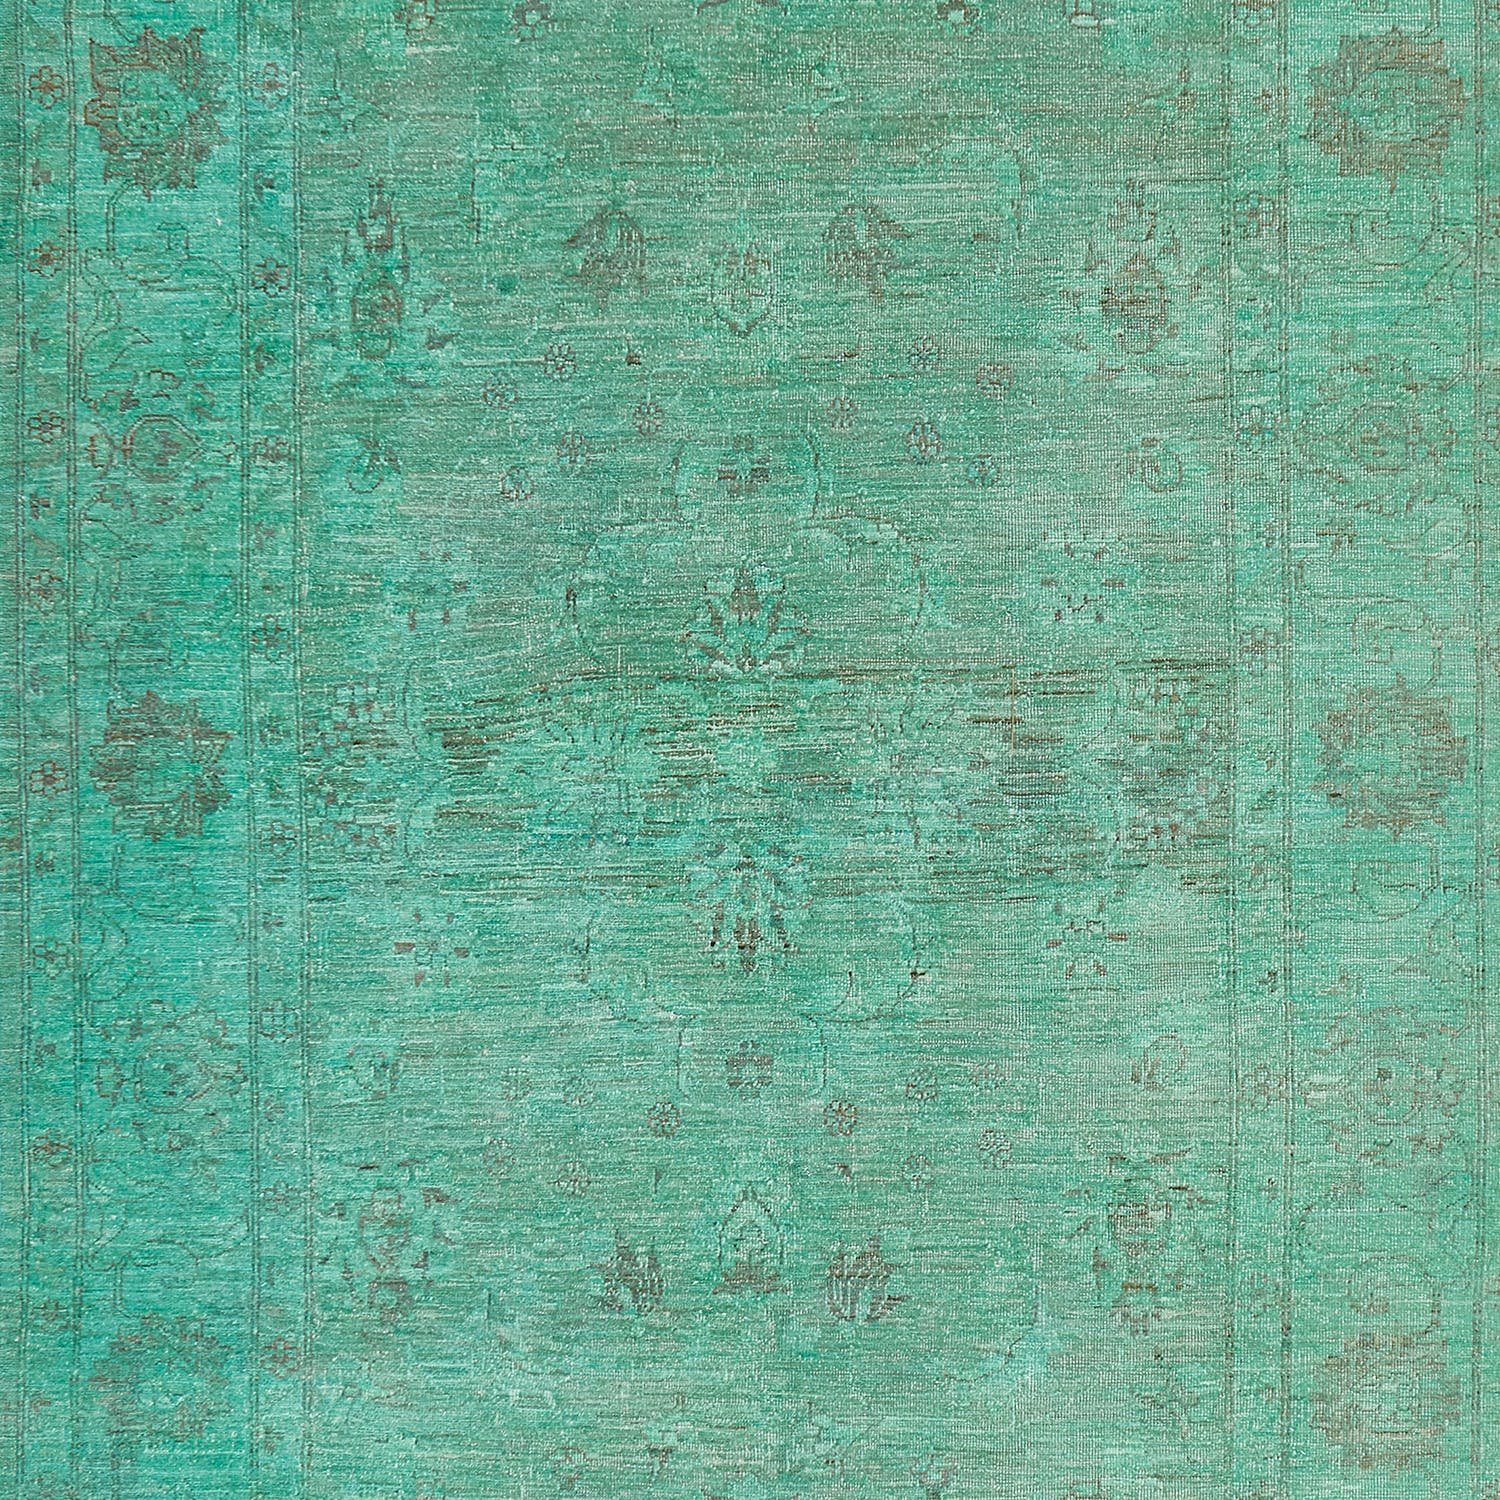 Vintage turquoise textured surface with symmetrical floral motifs for design.